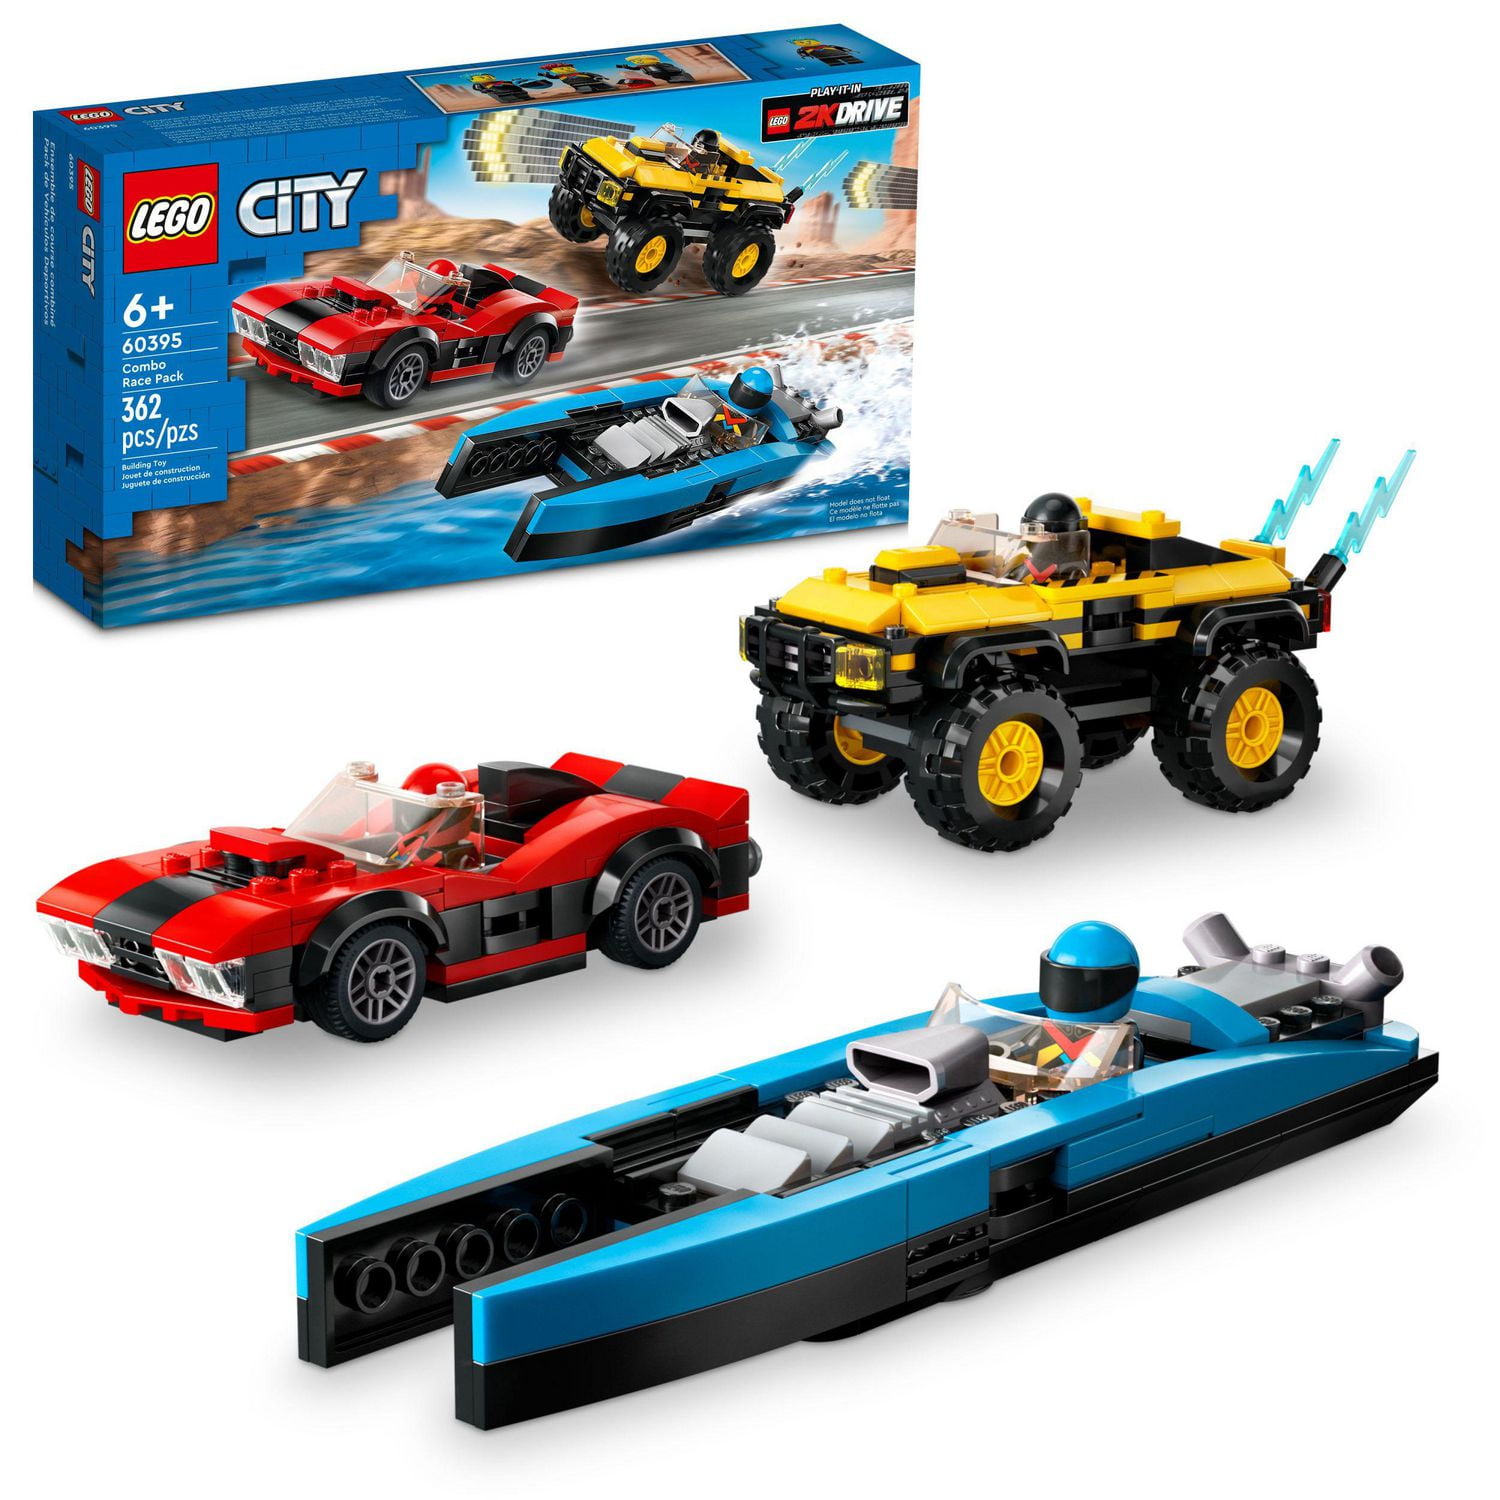 LEGO City Combo Race Pack 60395 Toy Car Building Set, Includes a